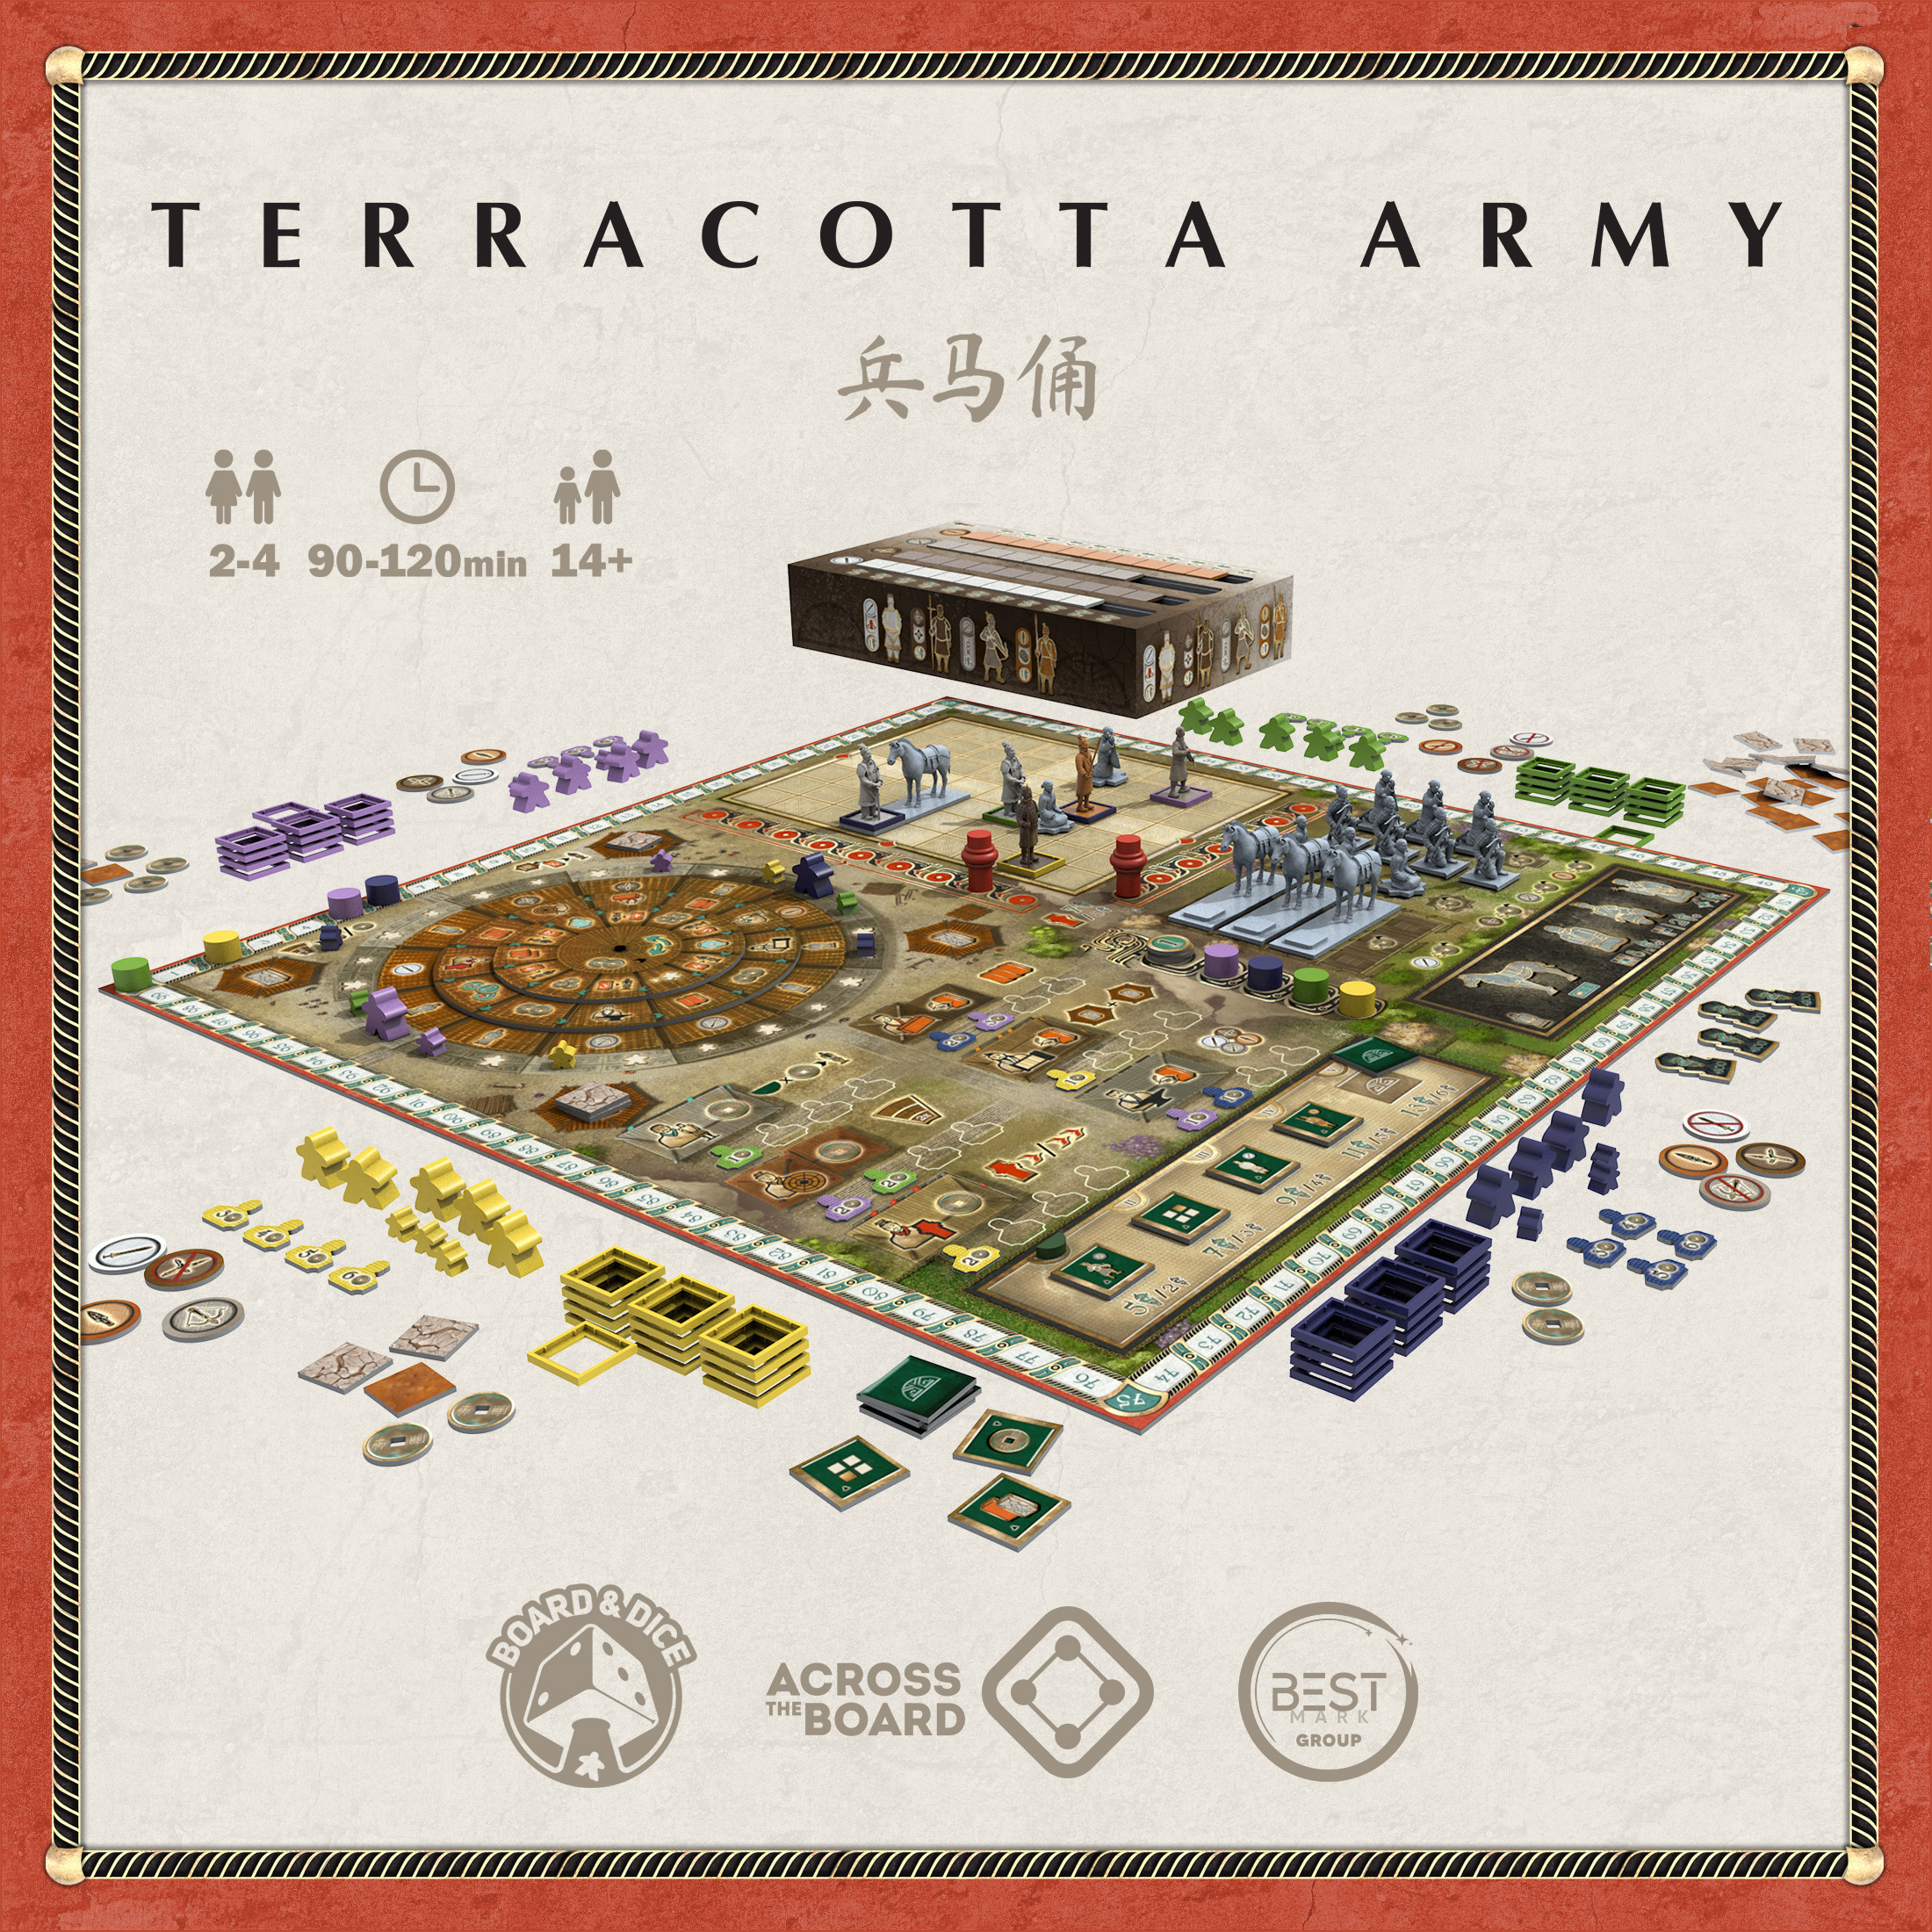 TerracottaArmy_Componentes